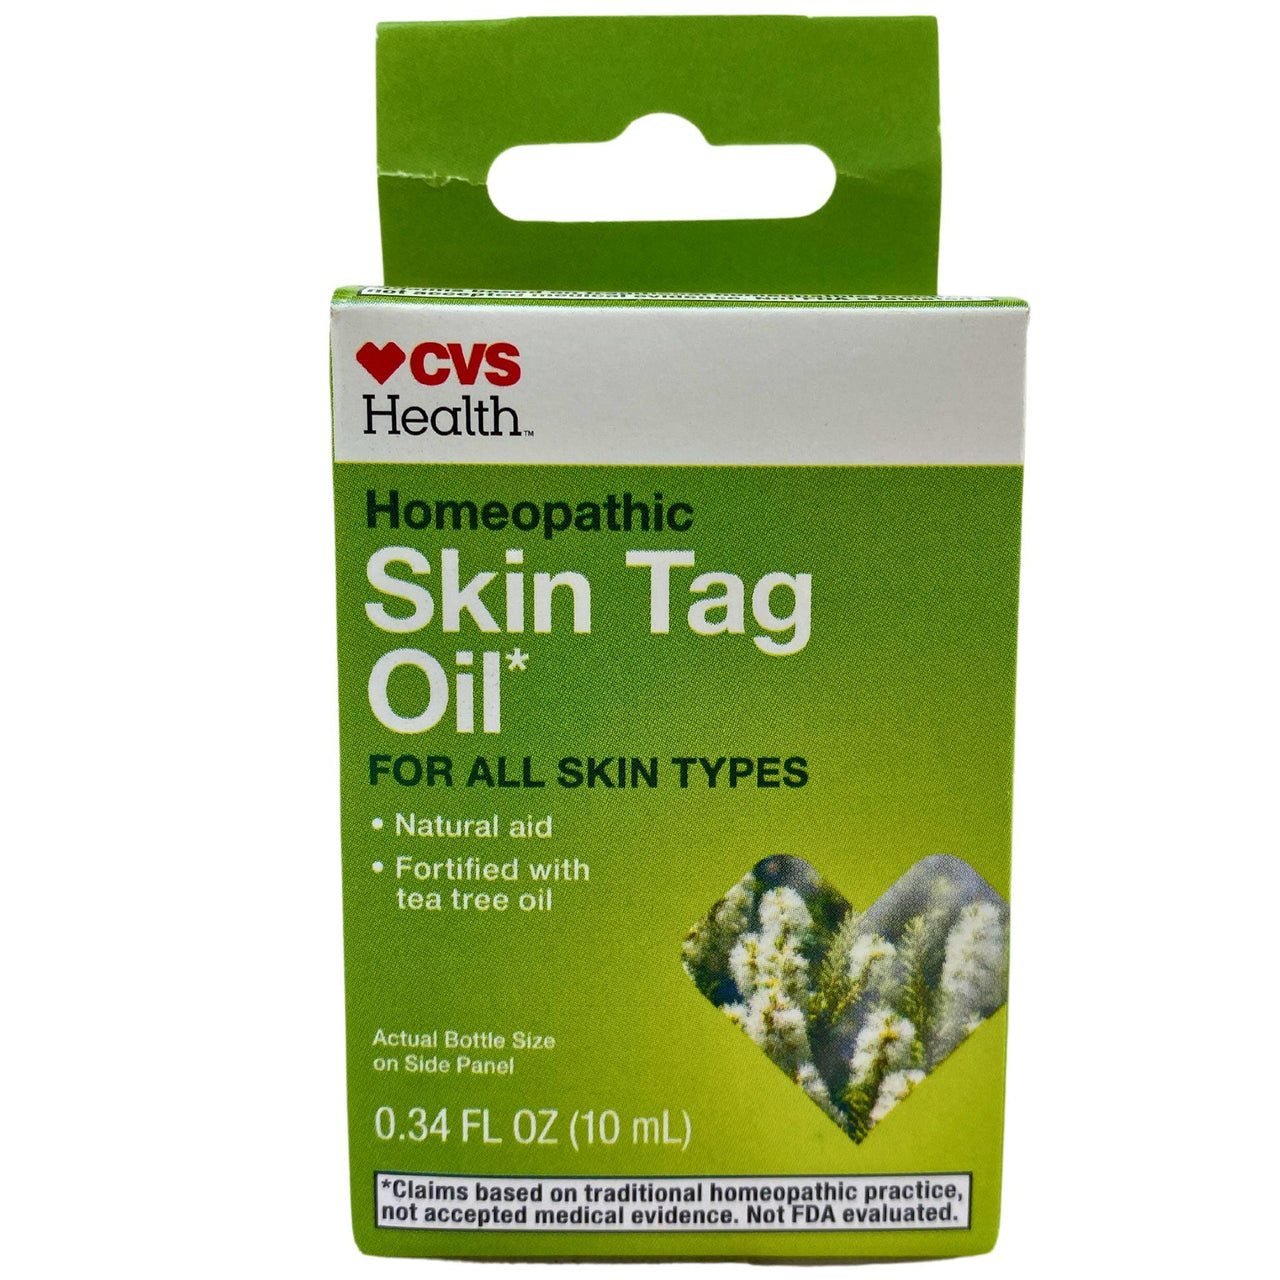 Homeopathic Skin Tag Oil For All Skin Types Natural Aid, Fortified With Tea Tree Oil 10mL (50 Pcs Lot) - Discount Wholesalers Inc